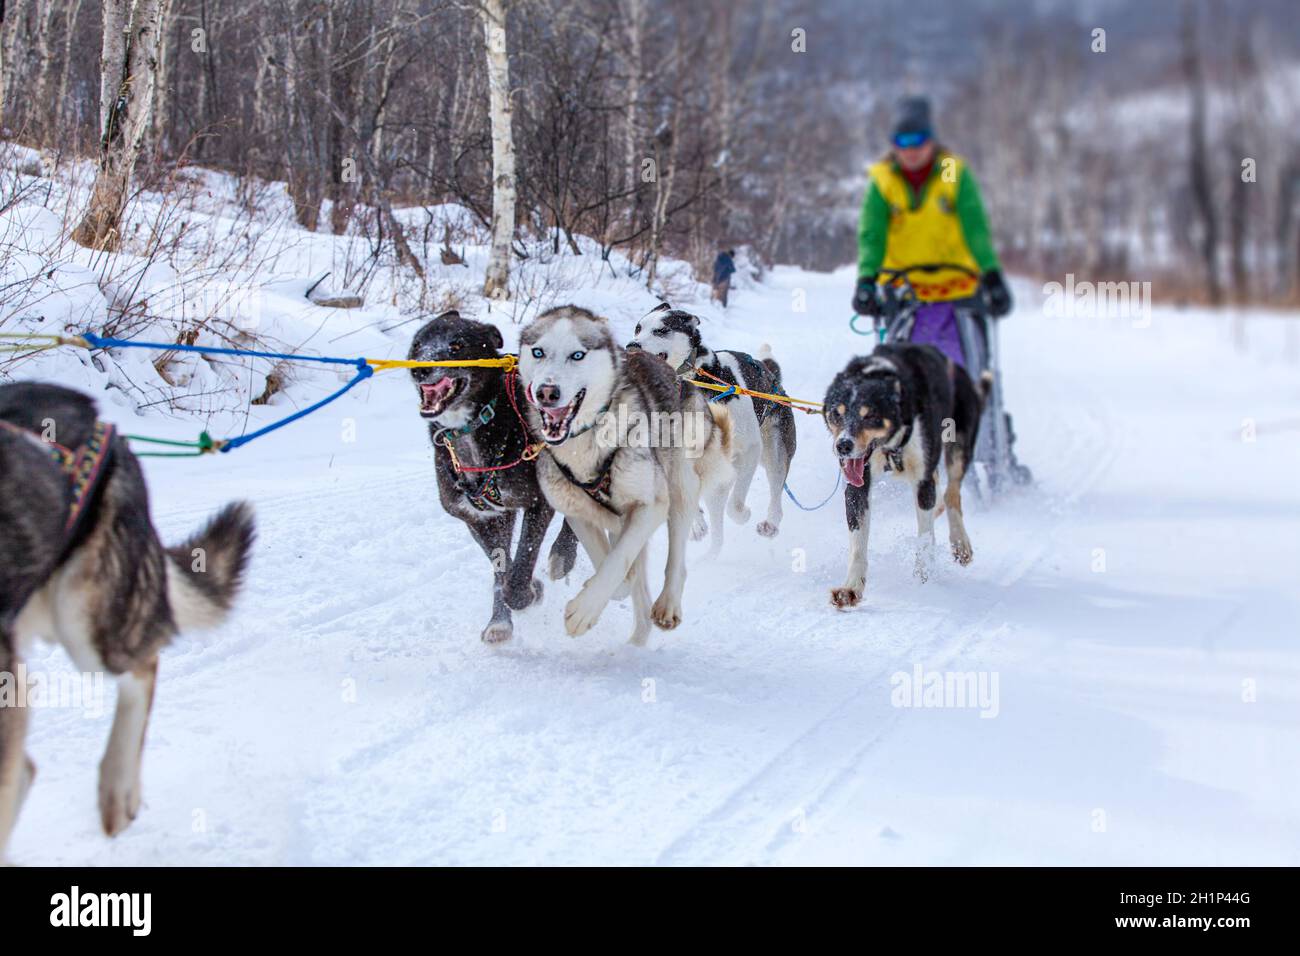 Woman musher hiding behind sleigh at sled dog race on snow in winter Stock Photo